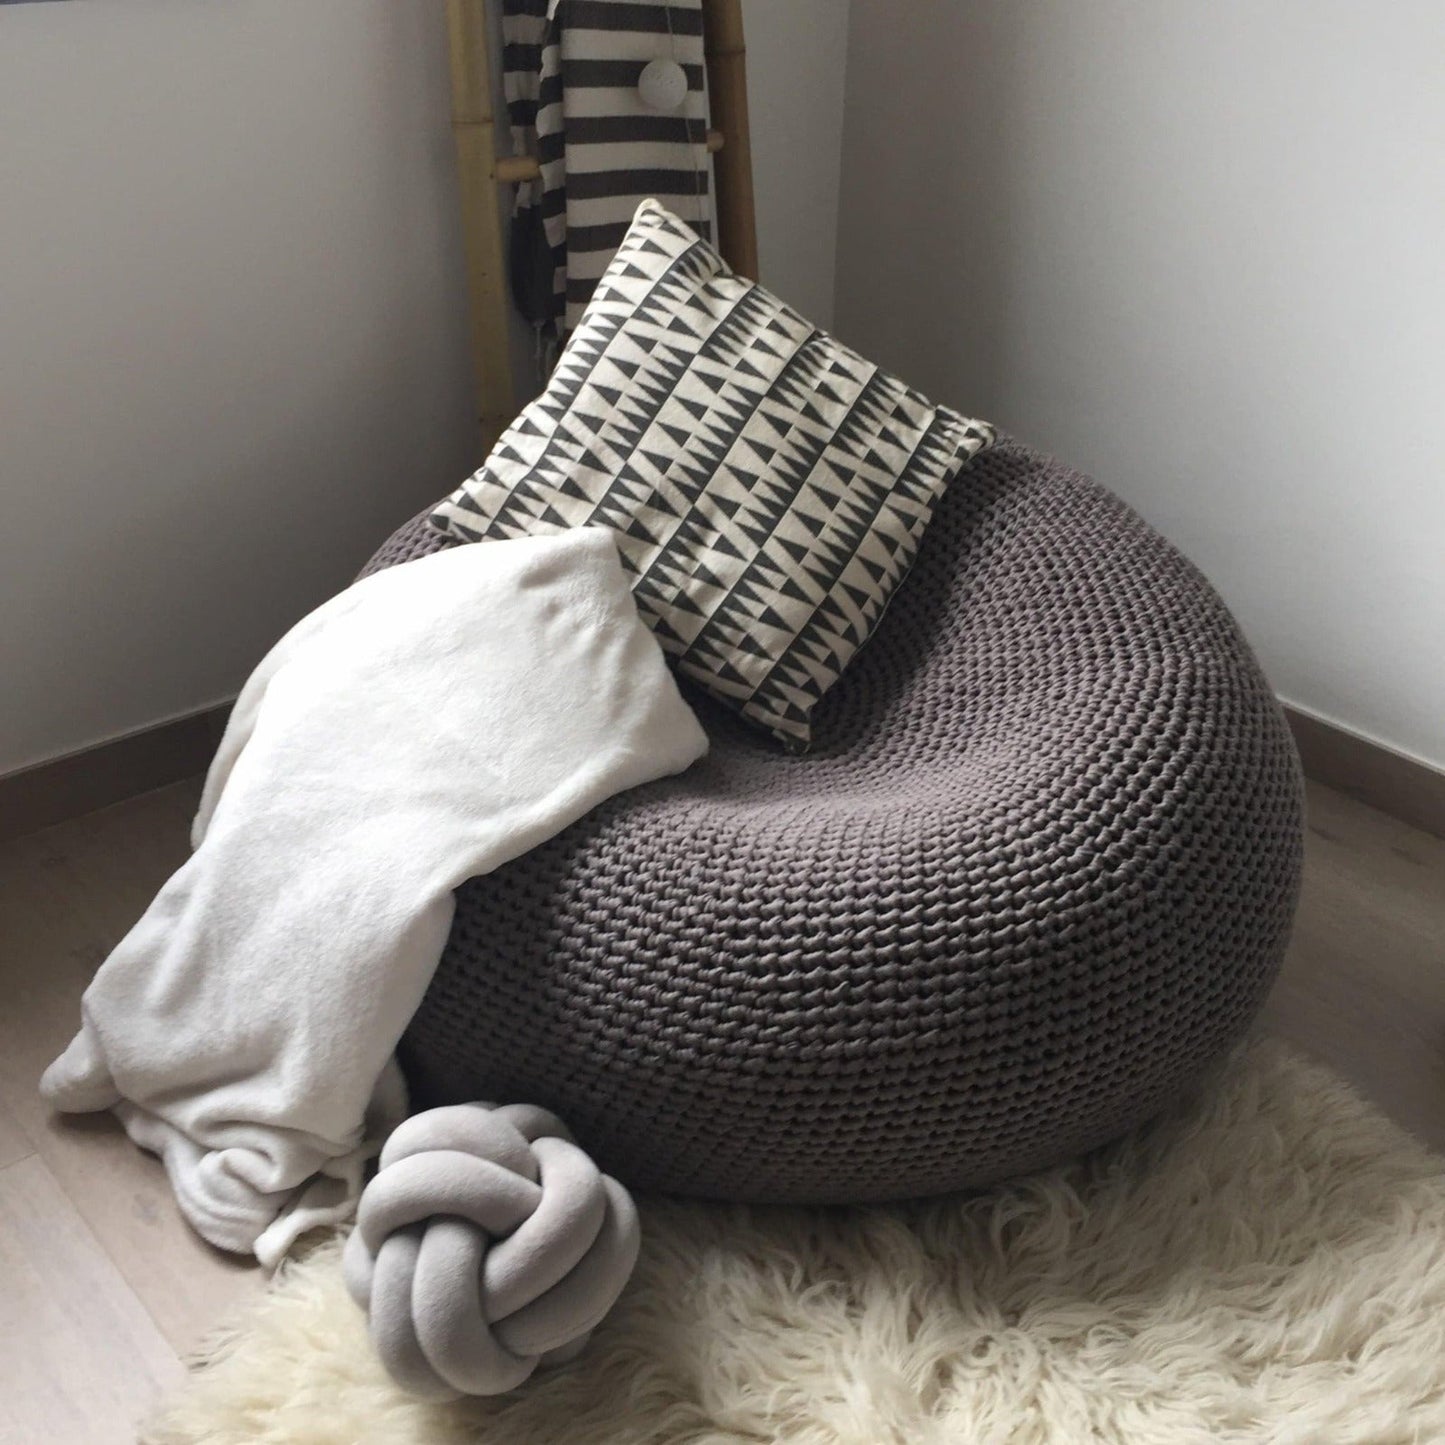 Extra Large Round Bean Bag Chair, Contemporary Furniture - Looping Home